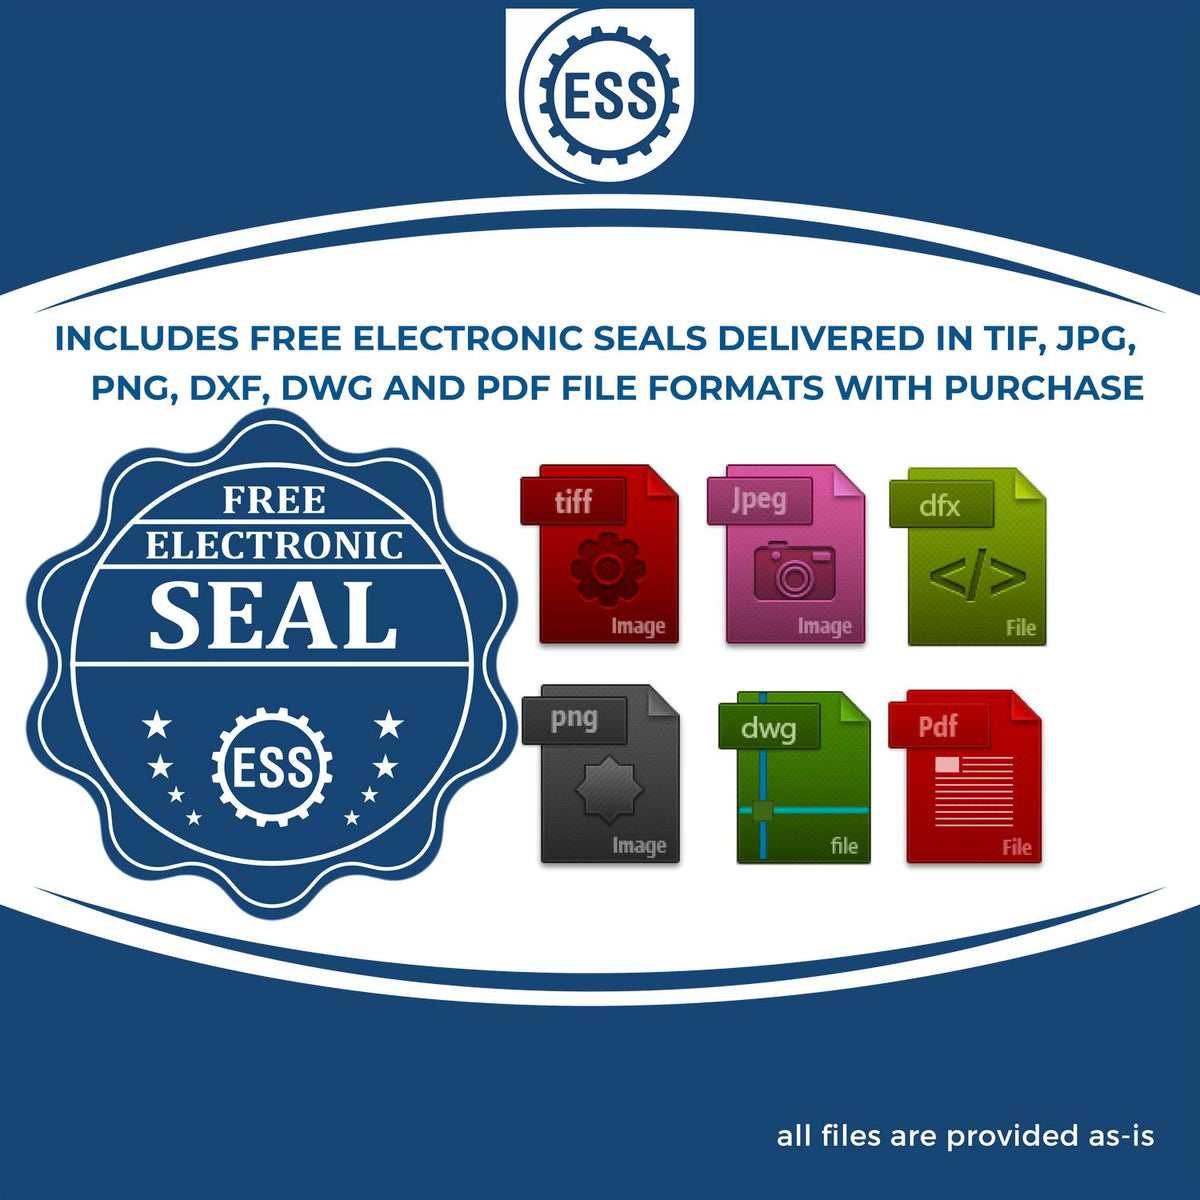 An infographic for the free electronic seal for the State of Arizona Extended Long Reach Engineer Seal illustrating the different file type icons such as DXF, DWG, TIF, JPG and PNG.